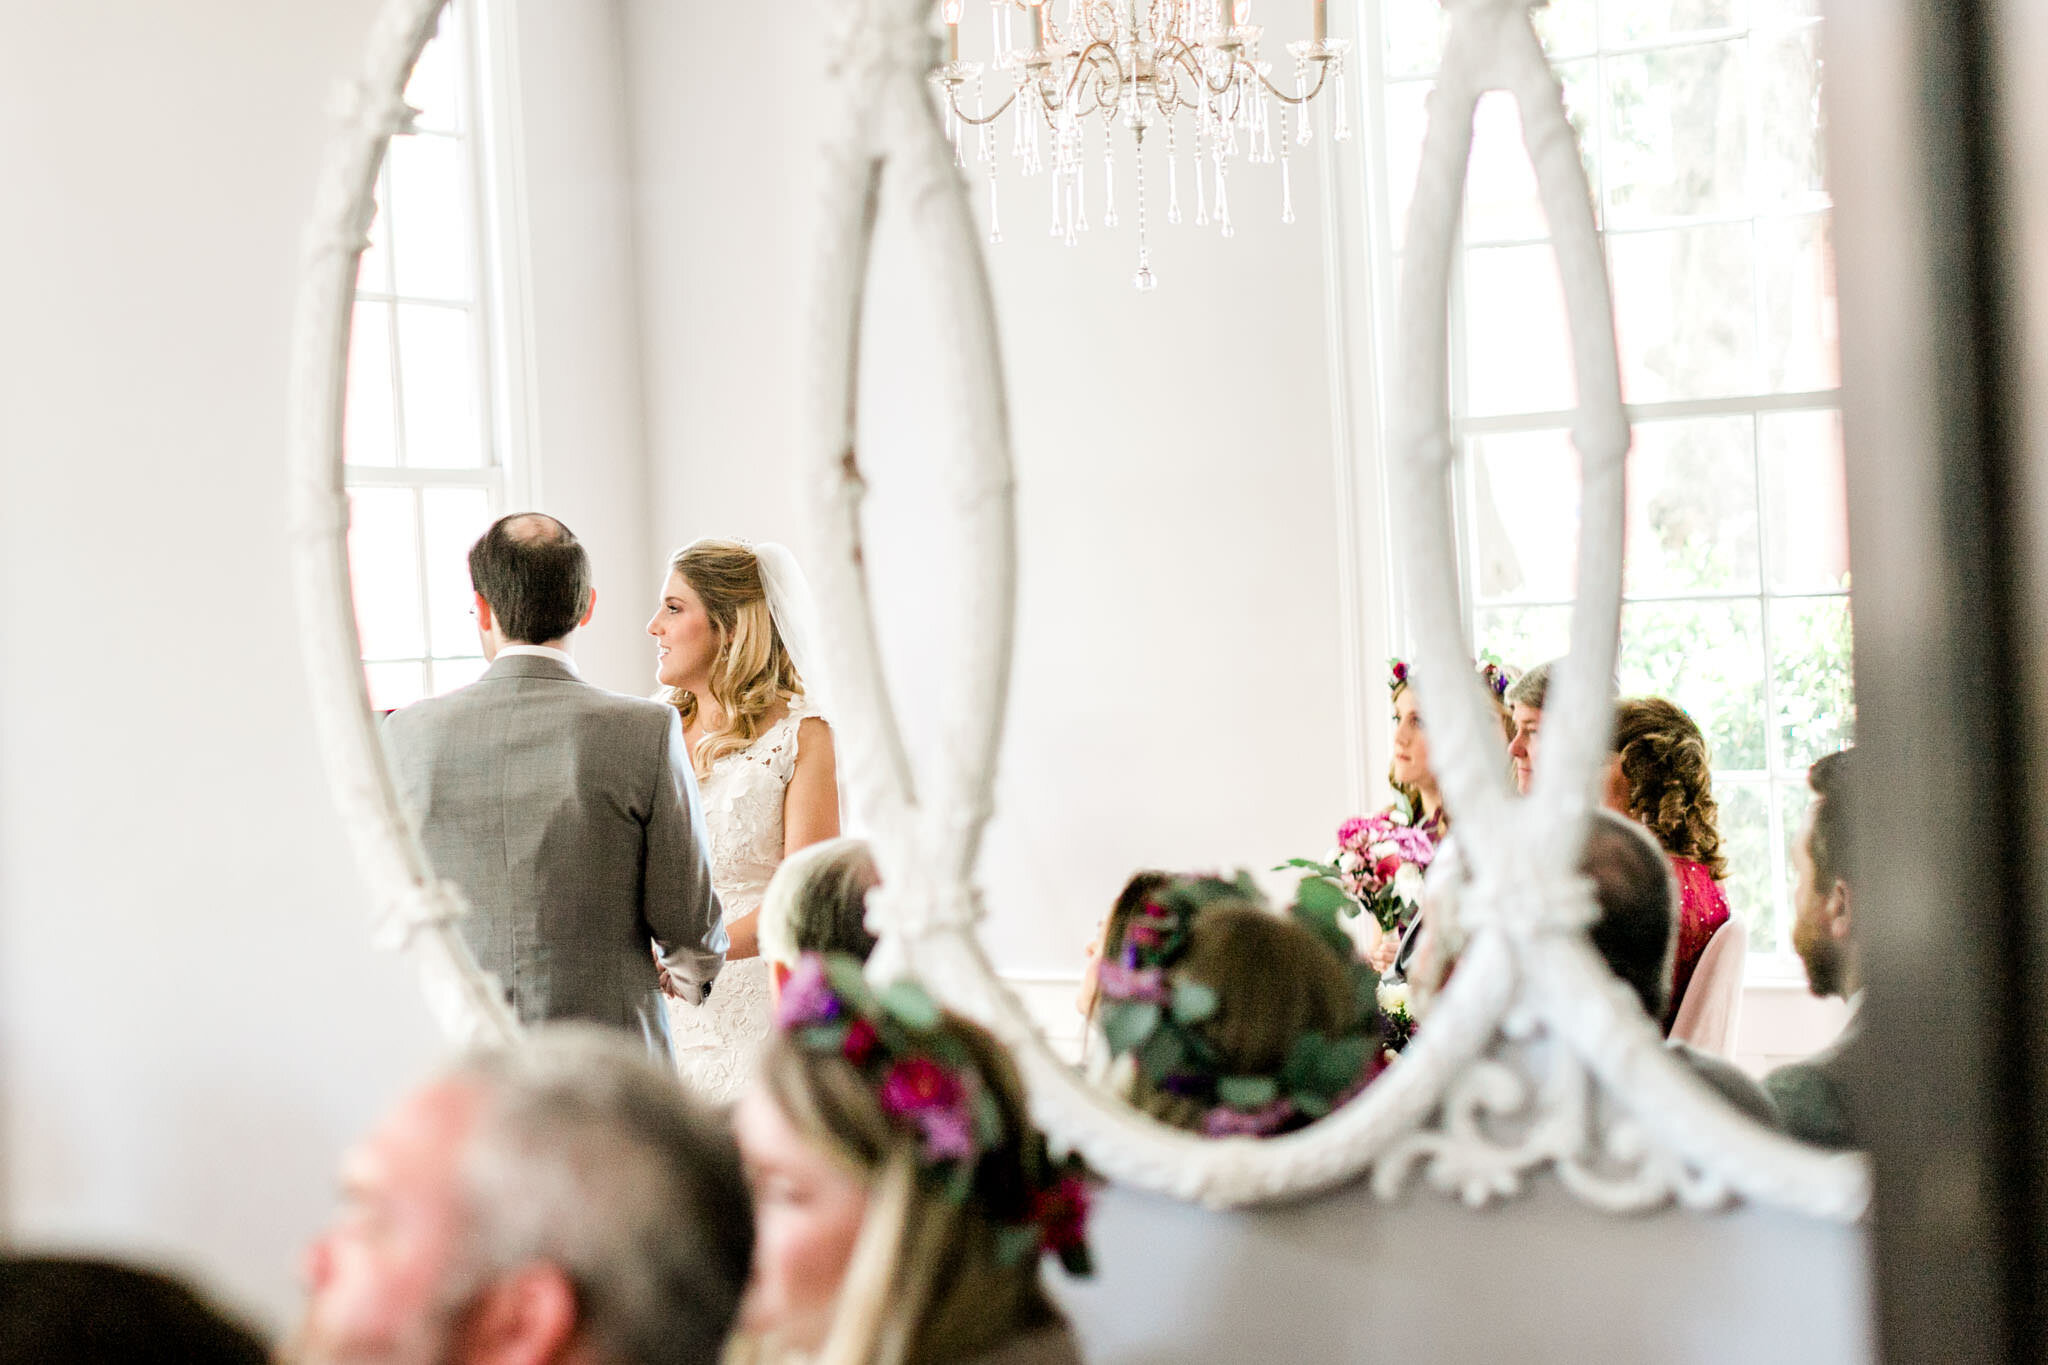 Durham Wedding Photographer | By G. Lin Photography | Reflection of bride and groom in the mirror